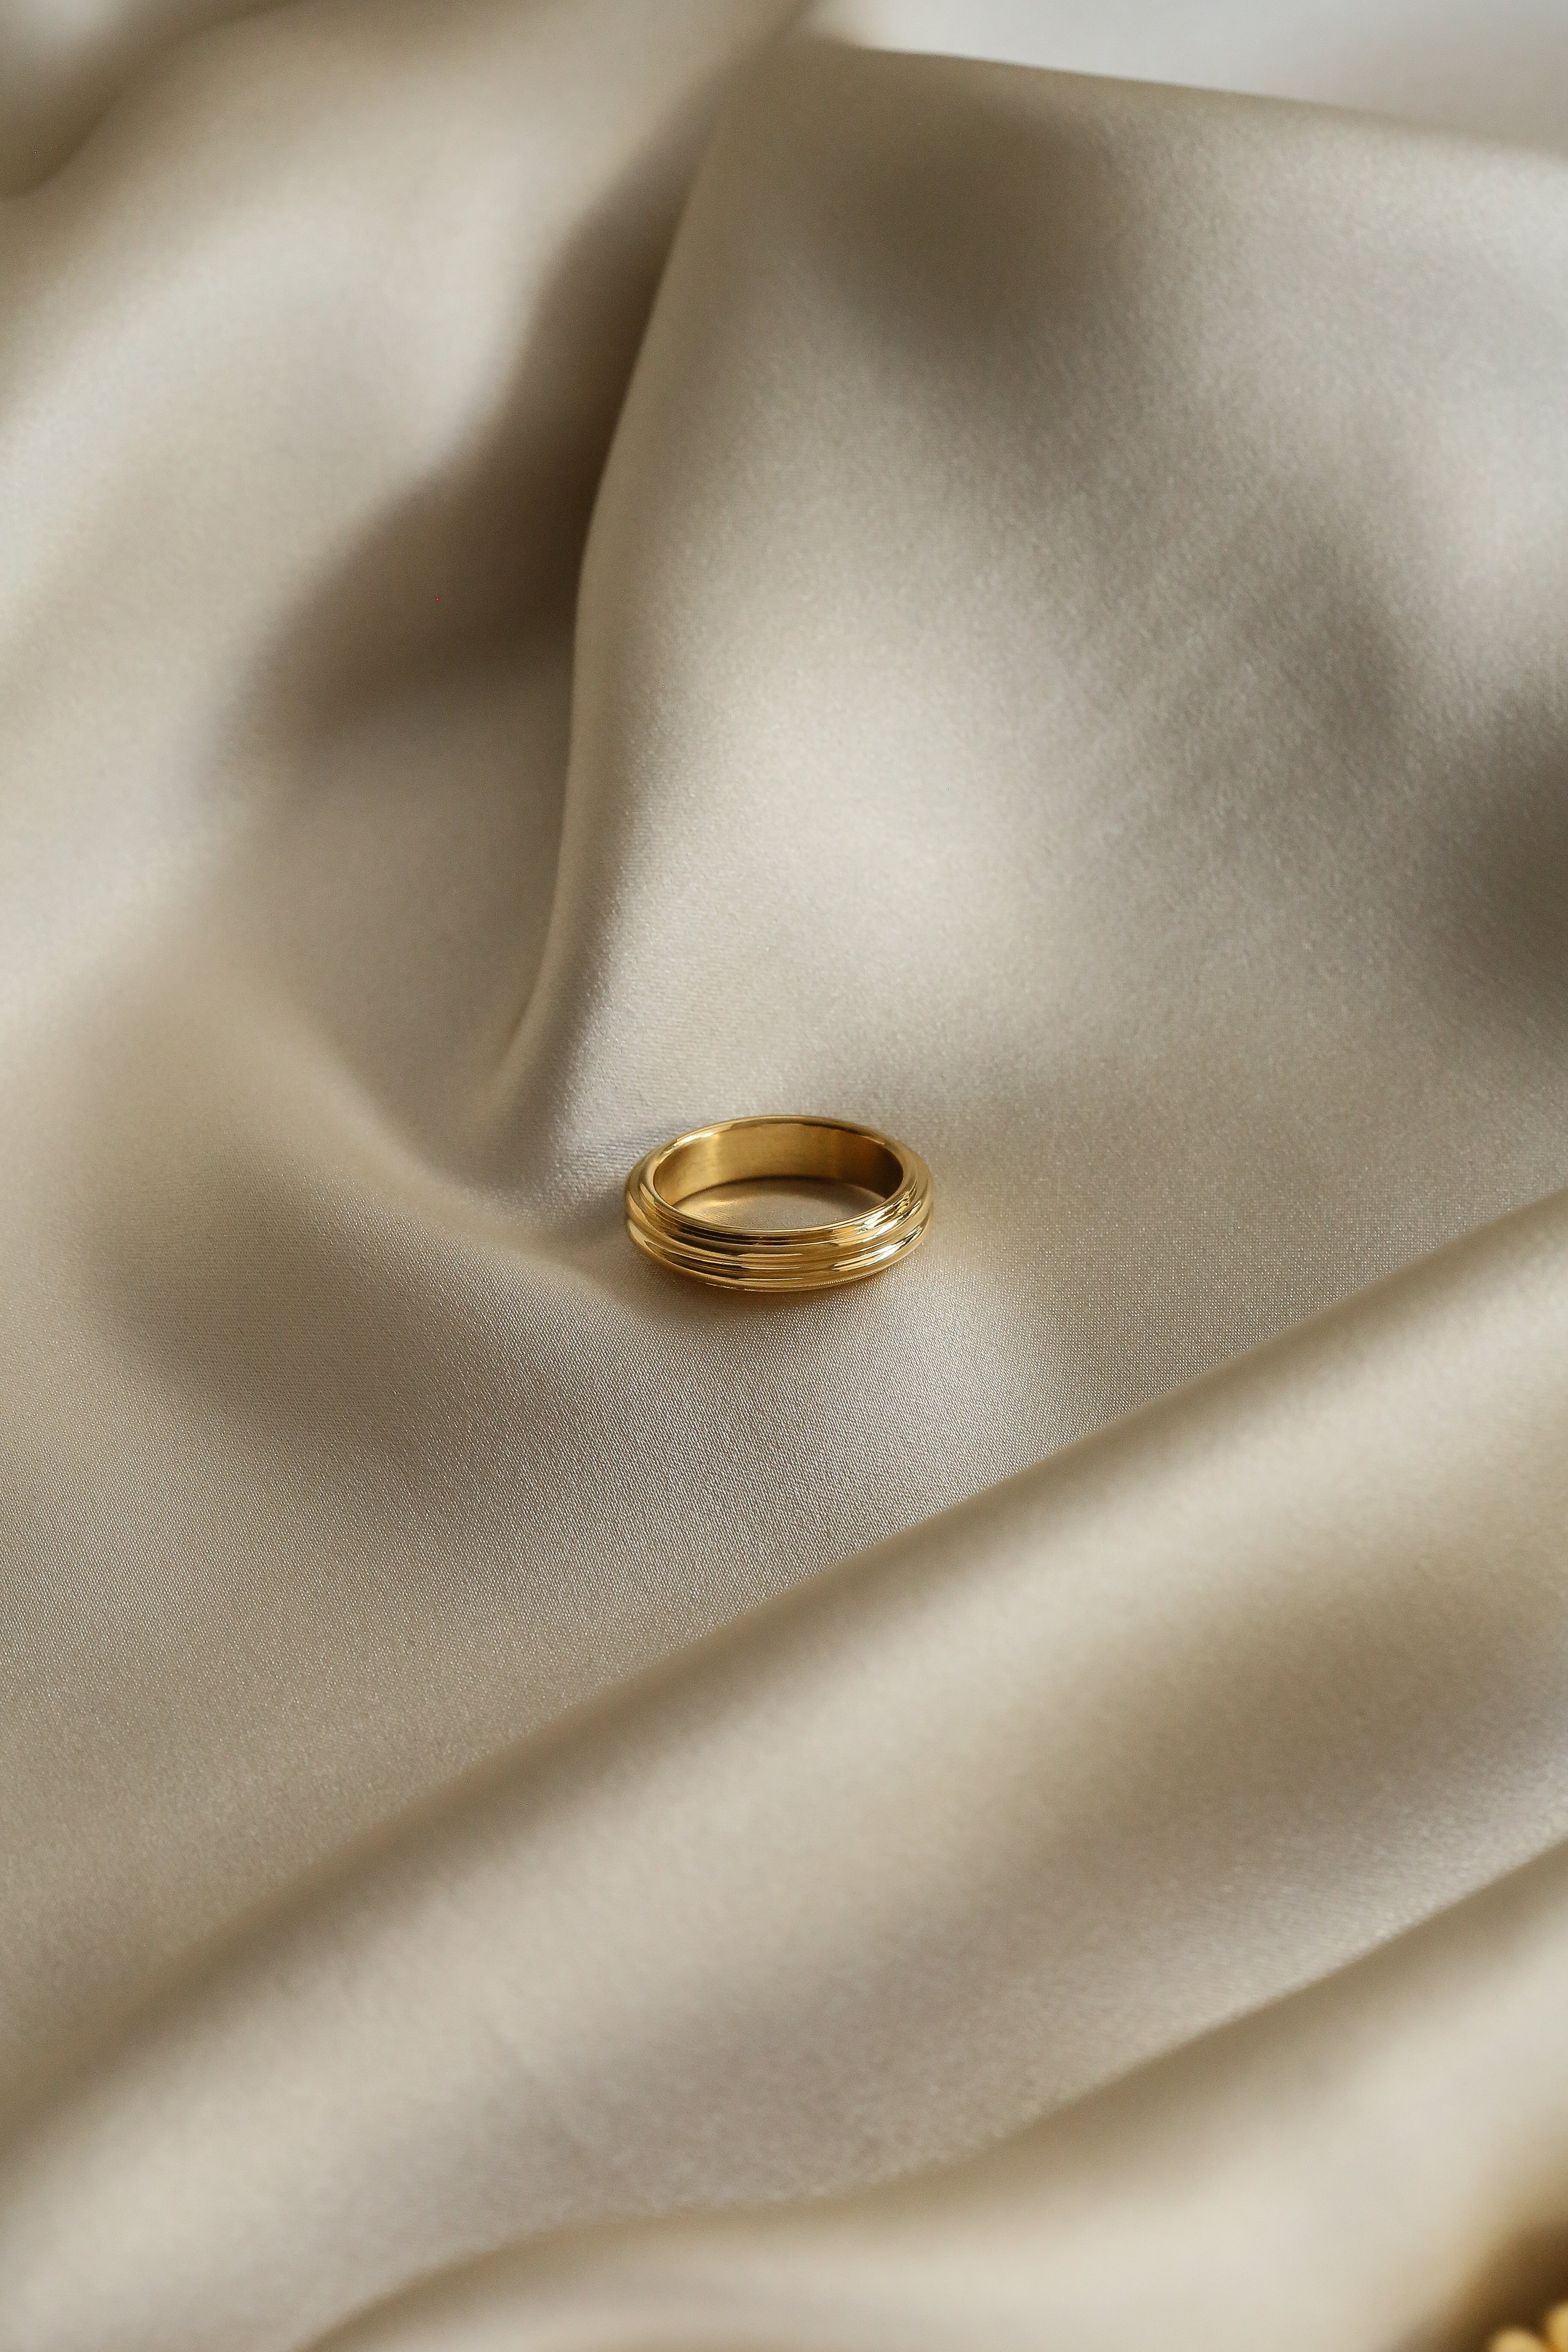 Ivy Ring - Boutique Minimaliste has waterproof, durable, elegant and vintage inspired jewelry